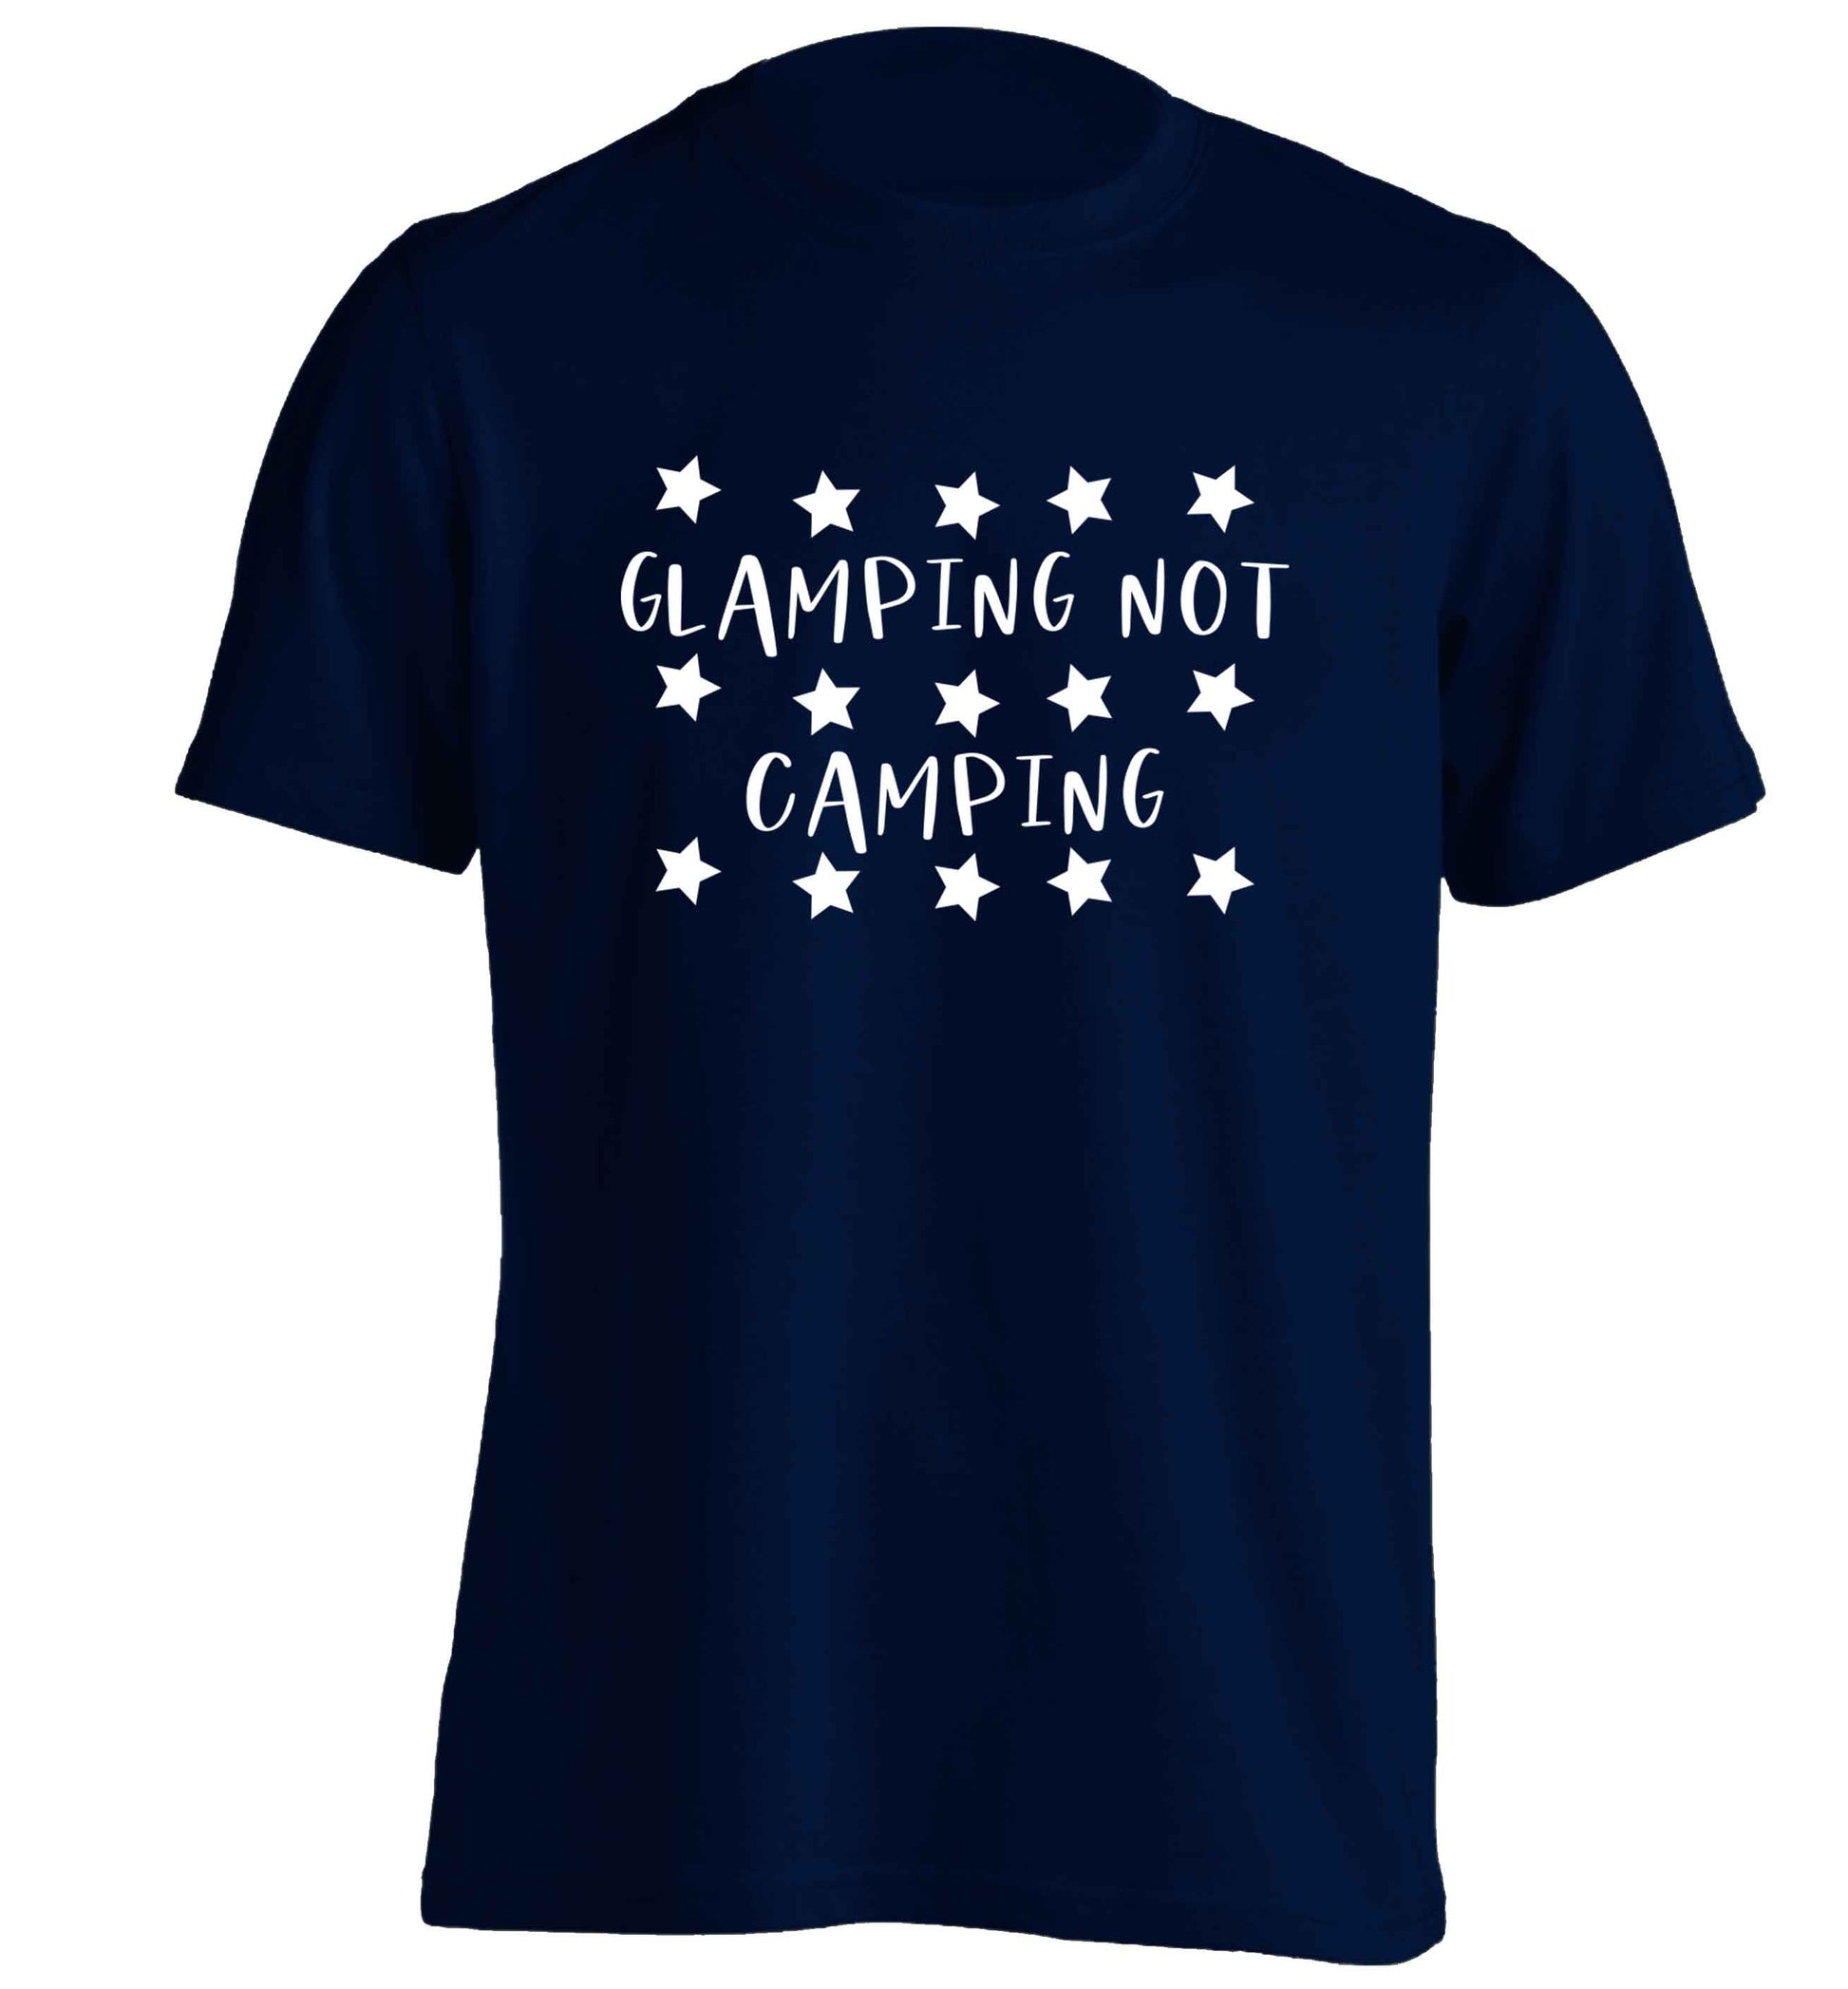 Glamping not camping adults unisex navy Tshirt 2XL